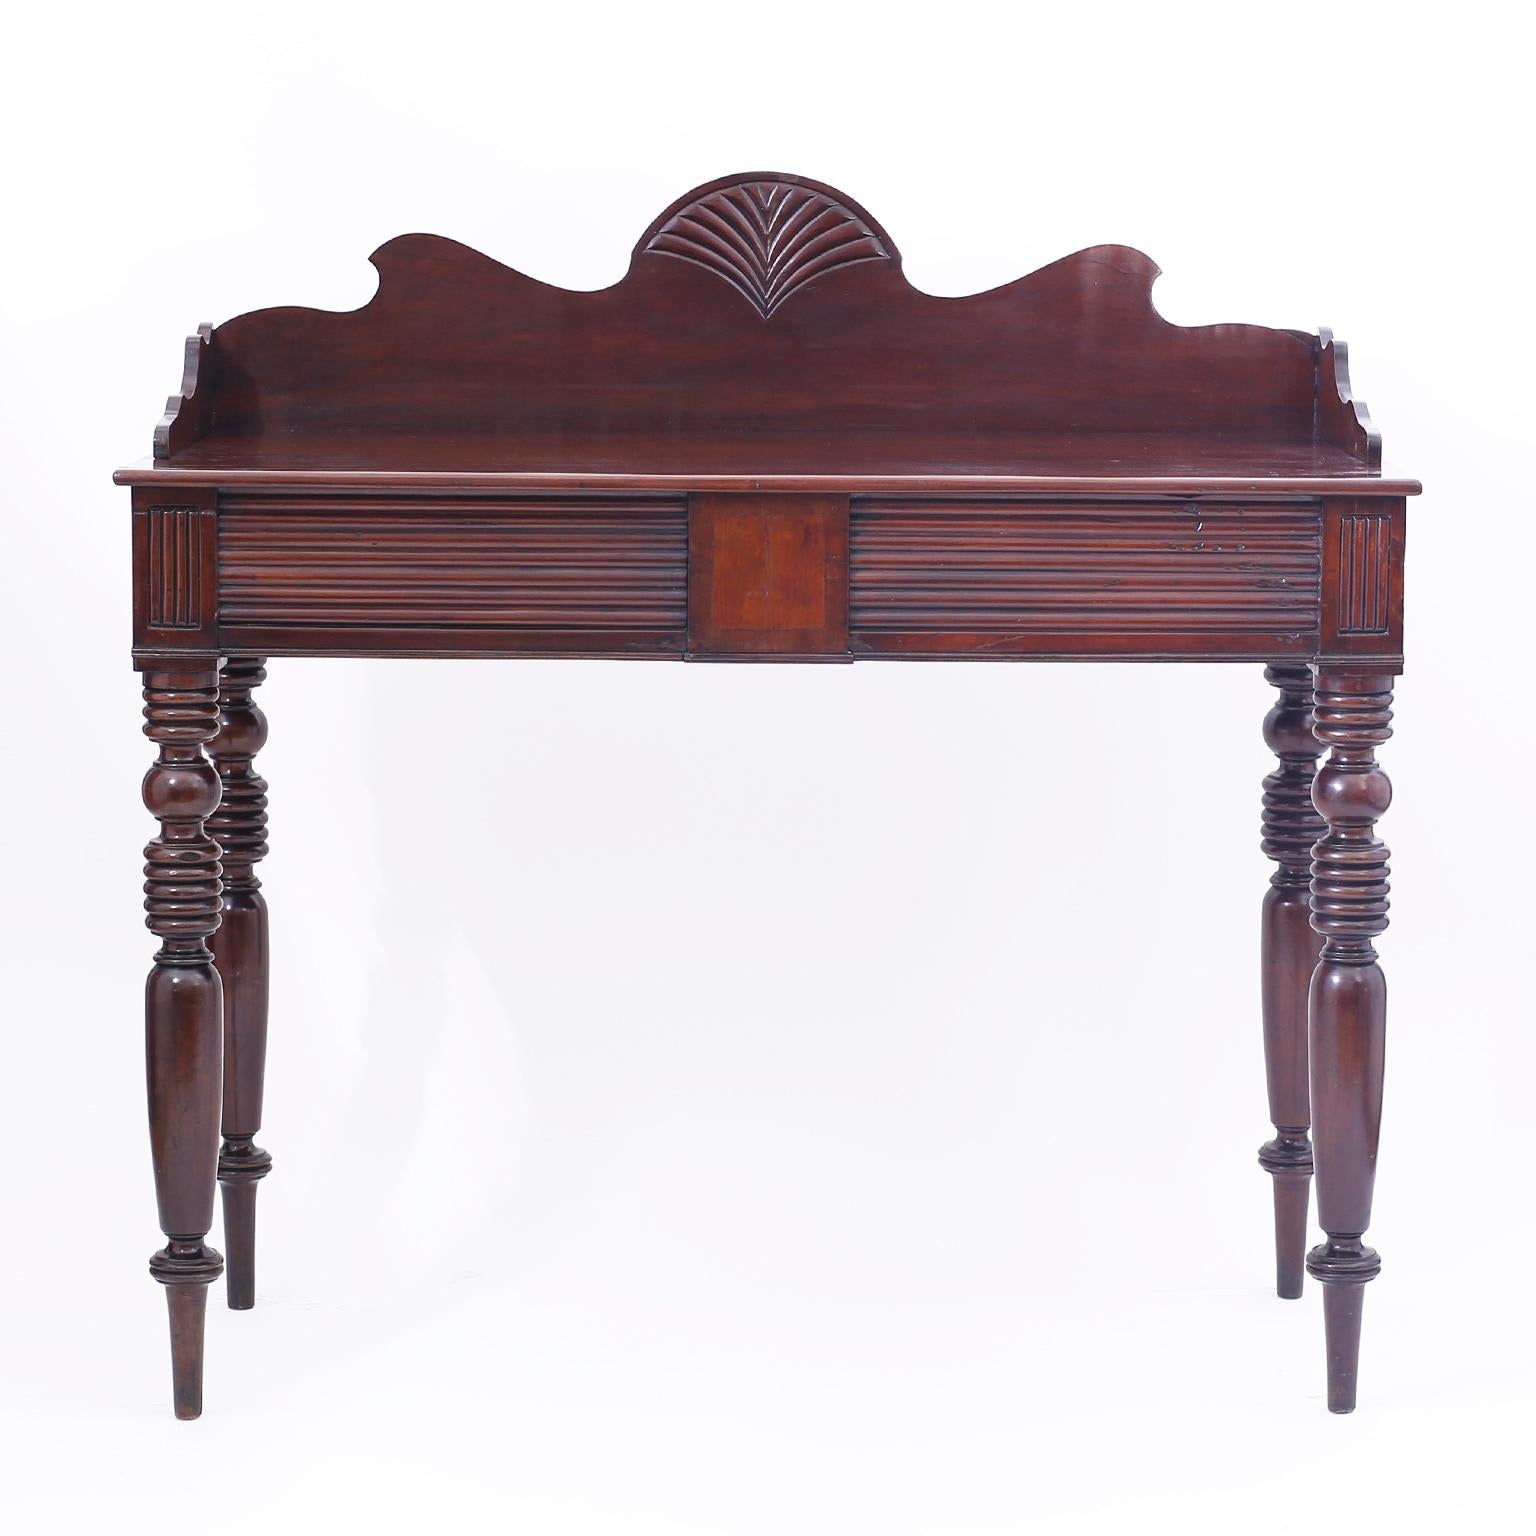 Impressive West Indies server from Jamaica handcrafted in indigenous lush grained mahogany featuring the proverbial dramatic carved and scalloped gallery, a hidden storage drawer on one side and long elegant turned legs.